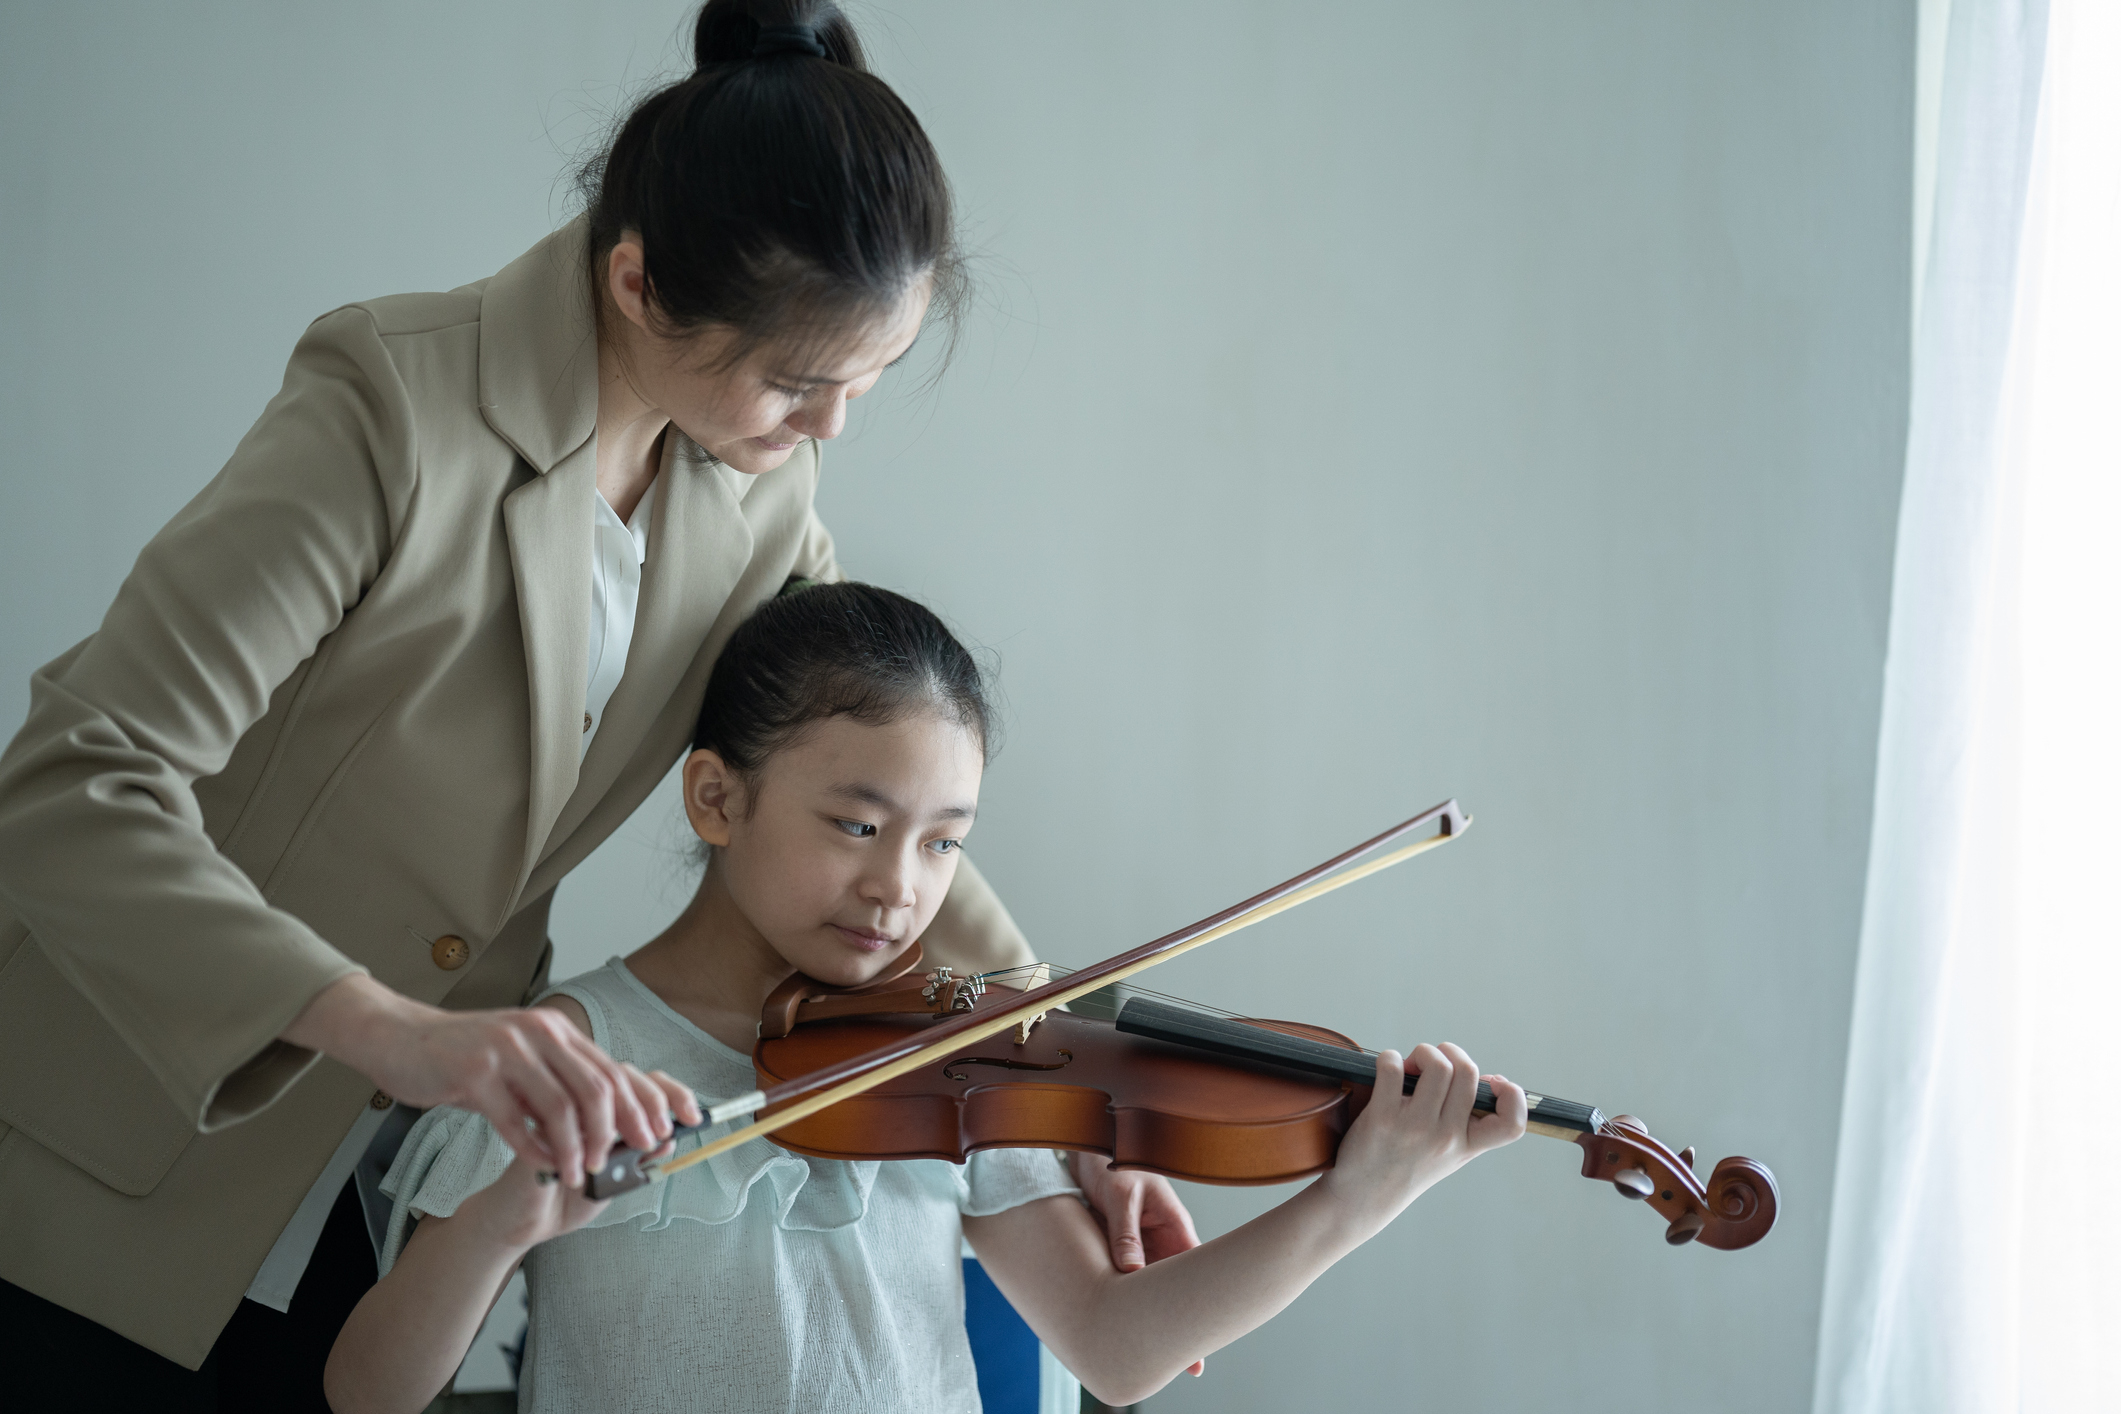 A woman teaching a student how to play violin